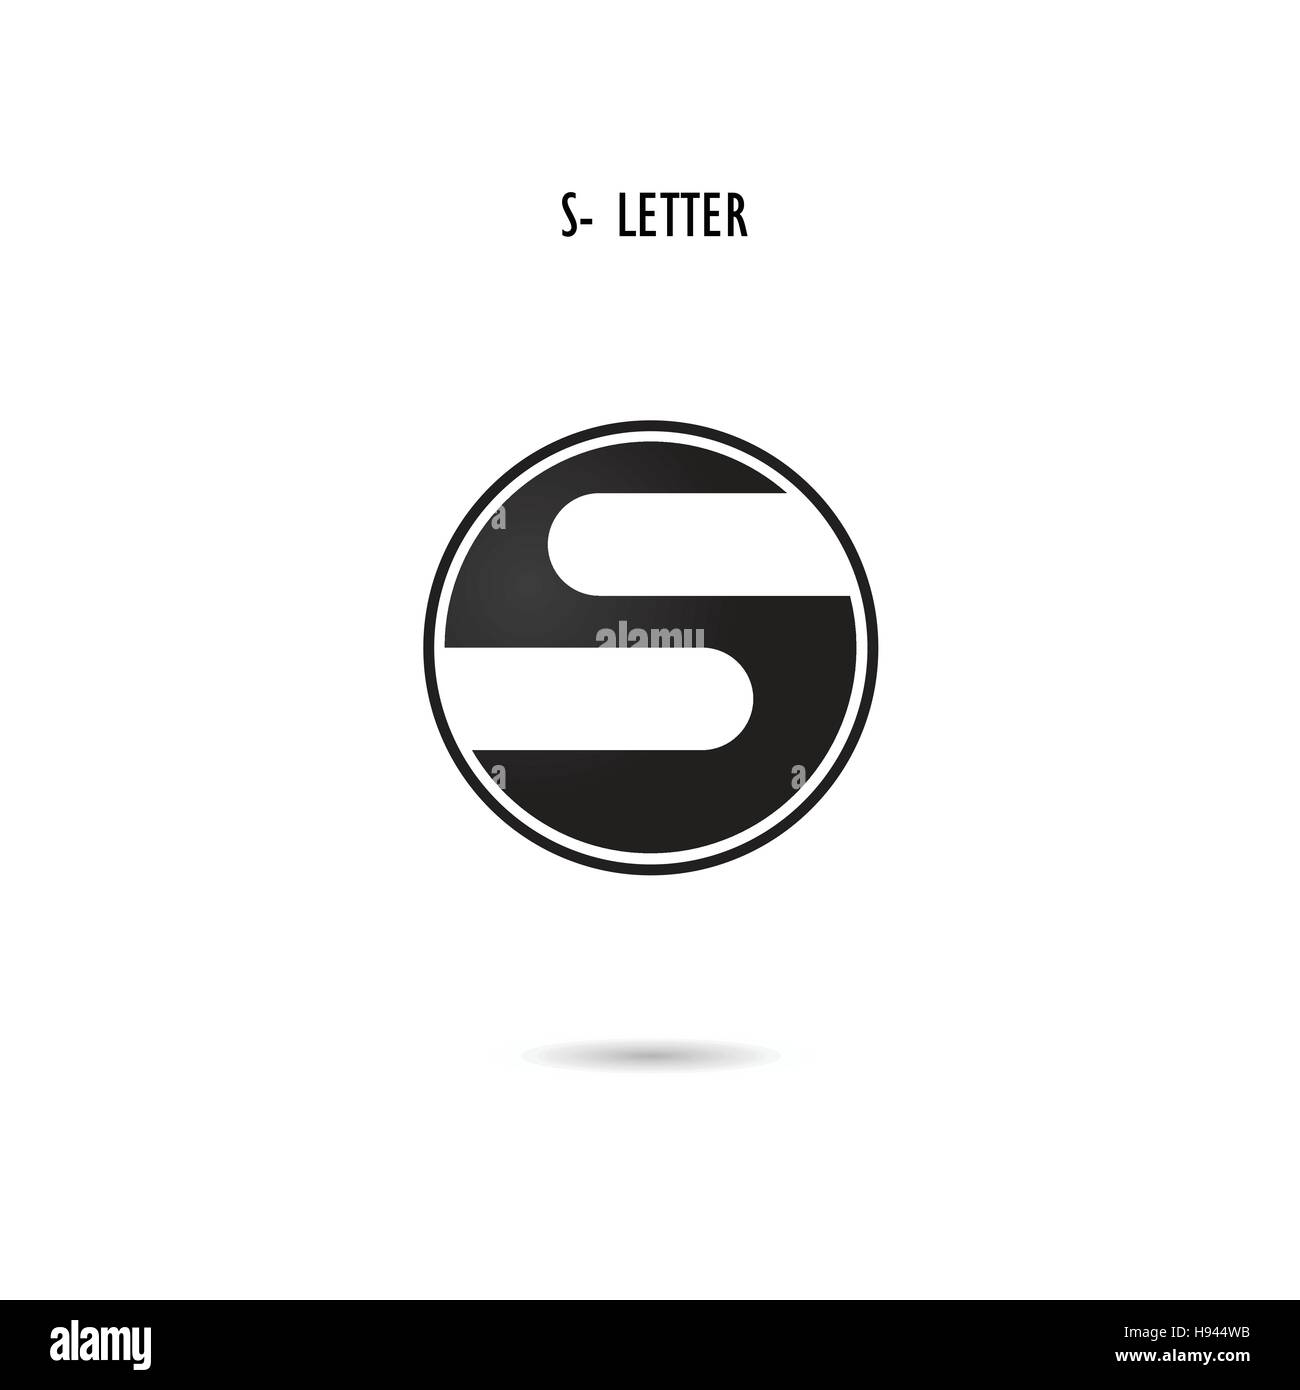 Creative S-letter icon abstract logo design.S-alphabet symbol.Corporate business and industrial logotype symbol.Vector illustration Stock Vector